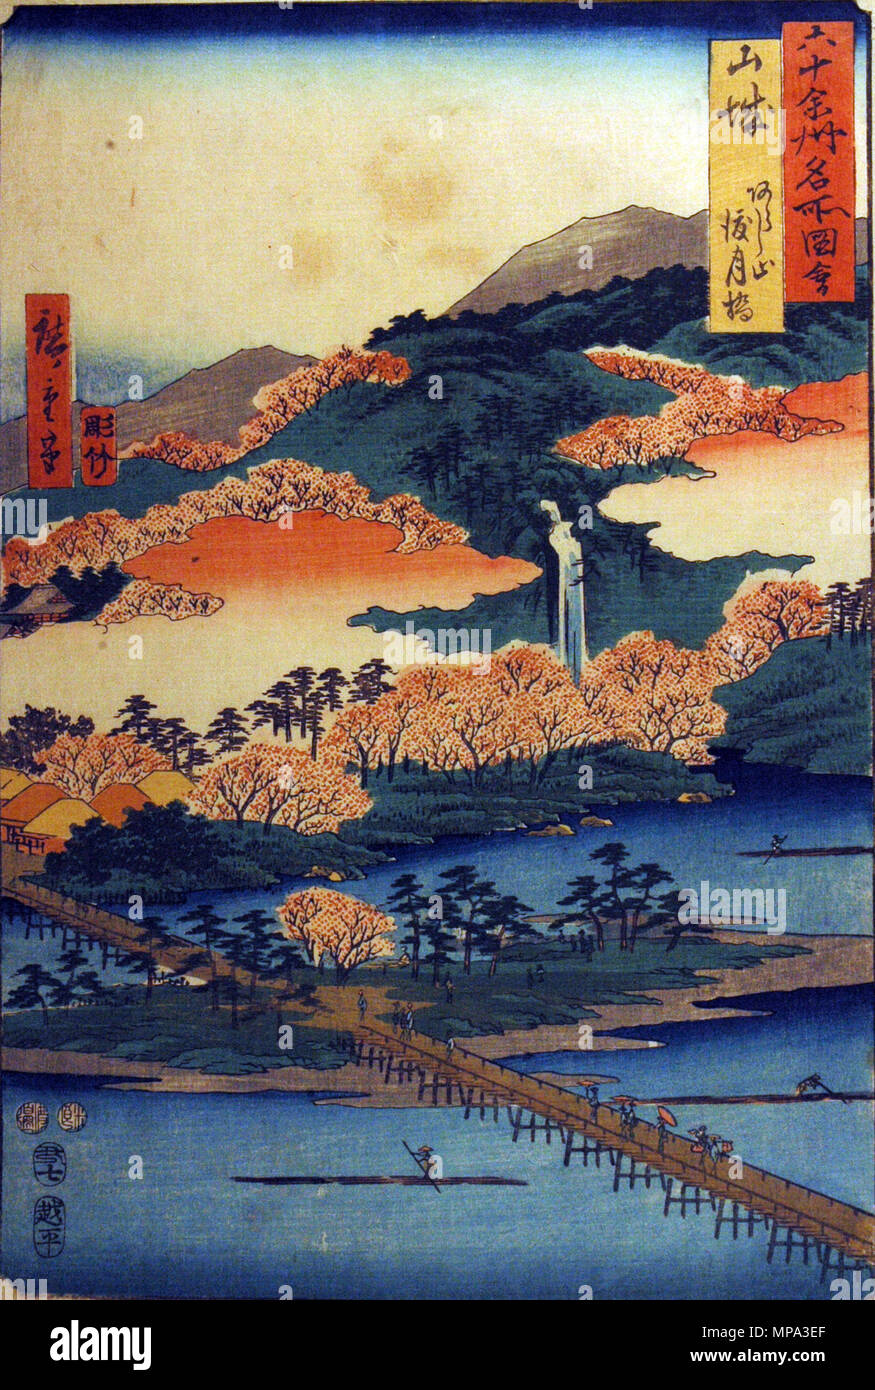 . English: Accession Number: 1957.256 Display Artist: Utagawa Hiroshige Display Title: 'Yamashiro Province, The Togetsu Bridge in Arashiyama' Series Title: Famous Views of the Sixty-odd Provinces Suite Name: Rokujuyoshu meisho zue Creation Date: 1853 Medium: Woodblock Height: 13 1/2 in. Width: 9 1/8 in. Display Dimensions: 13 1/2 in. x 9 1/8 in. (34.29 cm x 23.18 cm) Publisher: Koshimuraya Heisuke Credit Line: Bequest of Mrs. Cora Timken Burnett Label Copy: 'One of Series: Rokuju ye Shin. Meisho dzu. ''View of 60 or More Provinces''. Published by Koshei kei in 1853-1856. Included in this colle Stock Photo